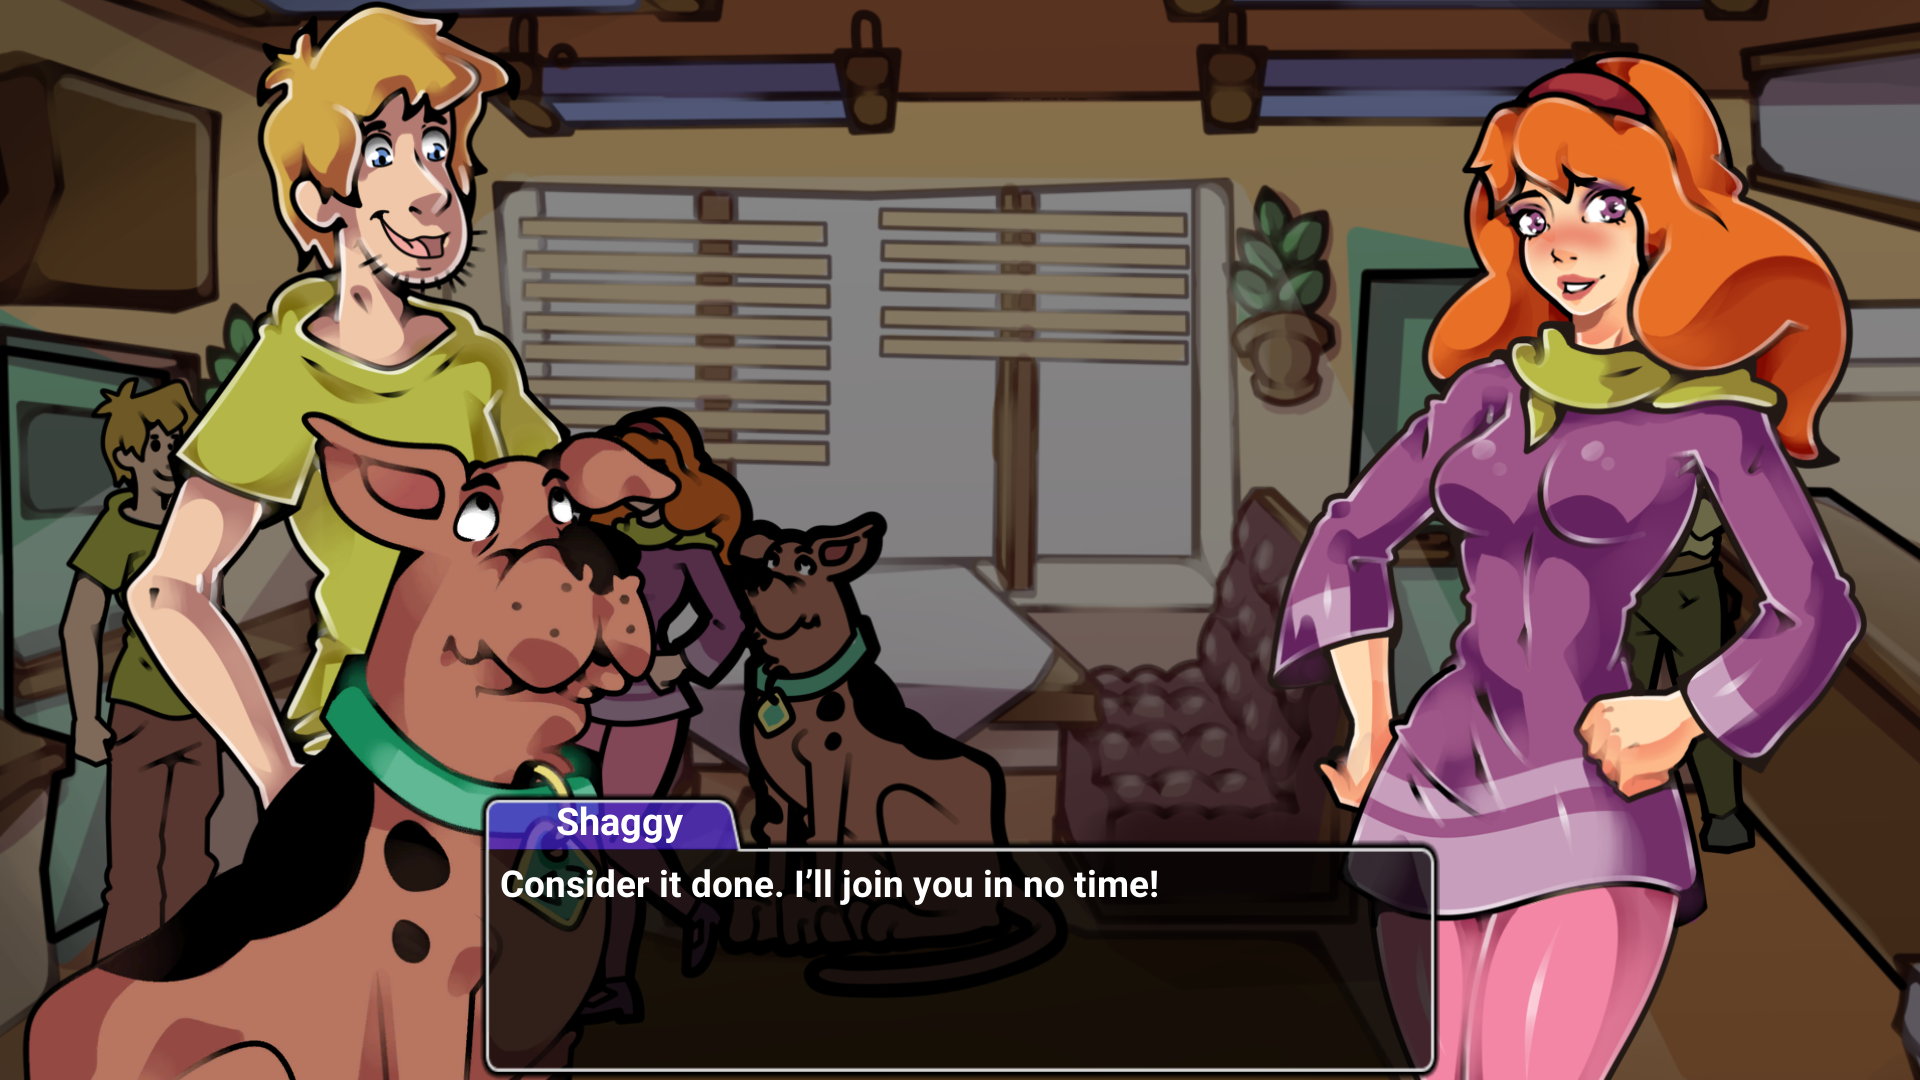 1920px x 1080px - Scooby-Doo! A Depraved Investigation [DEMO] - free game download, reviews,  mega - xGames